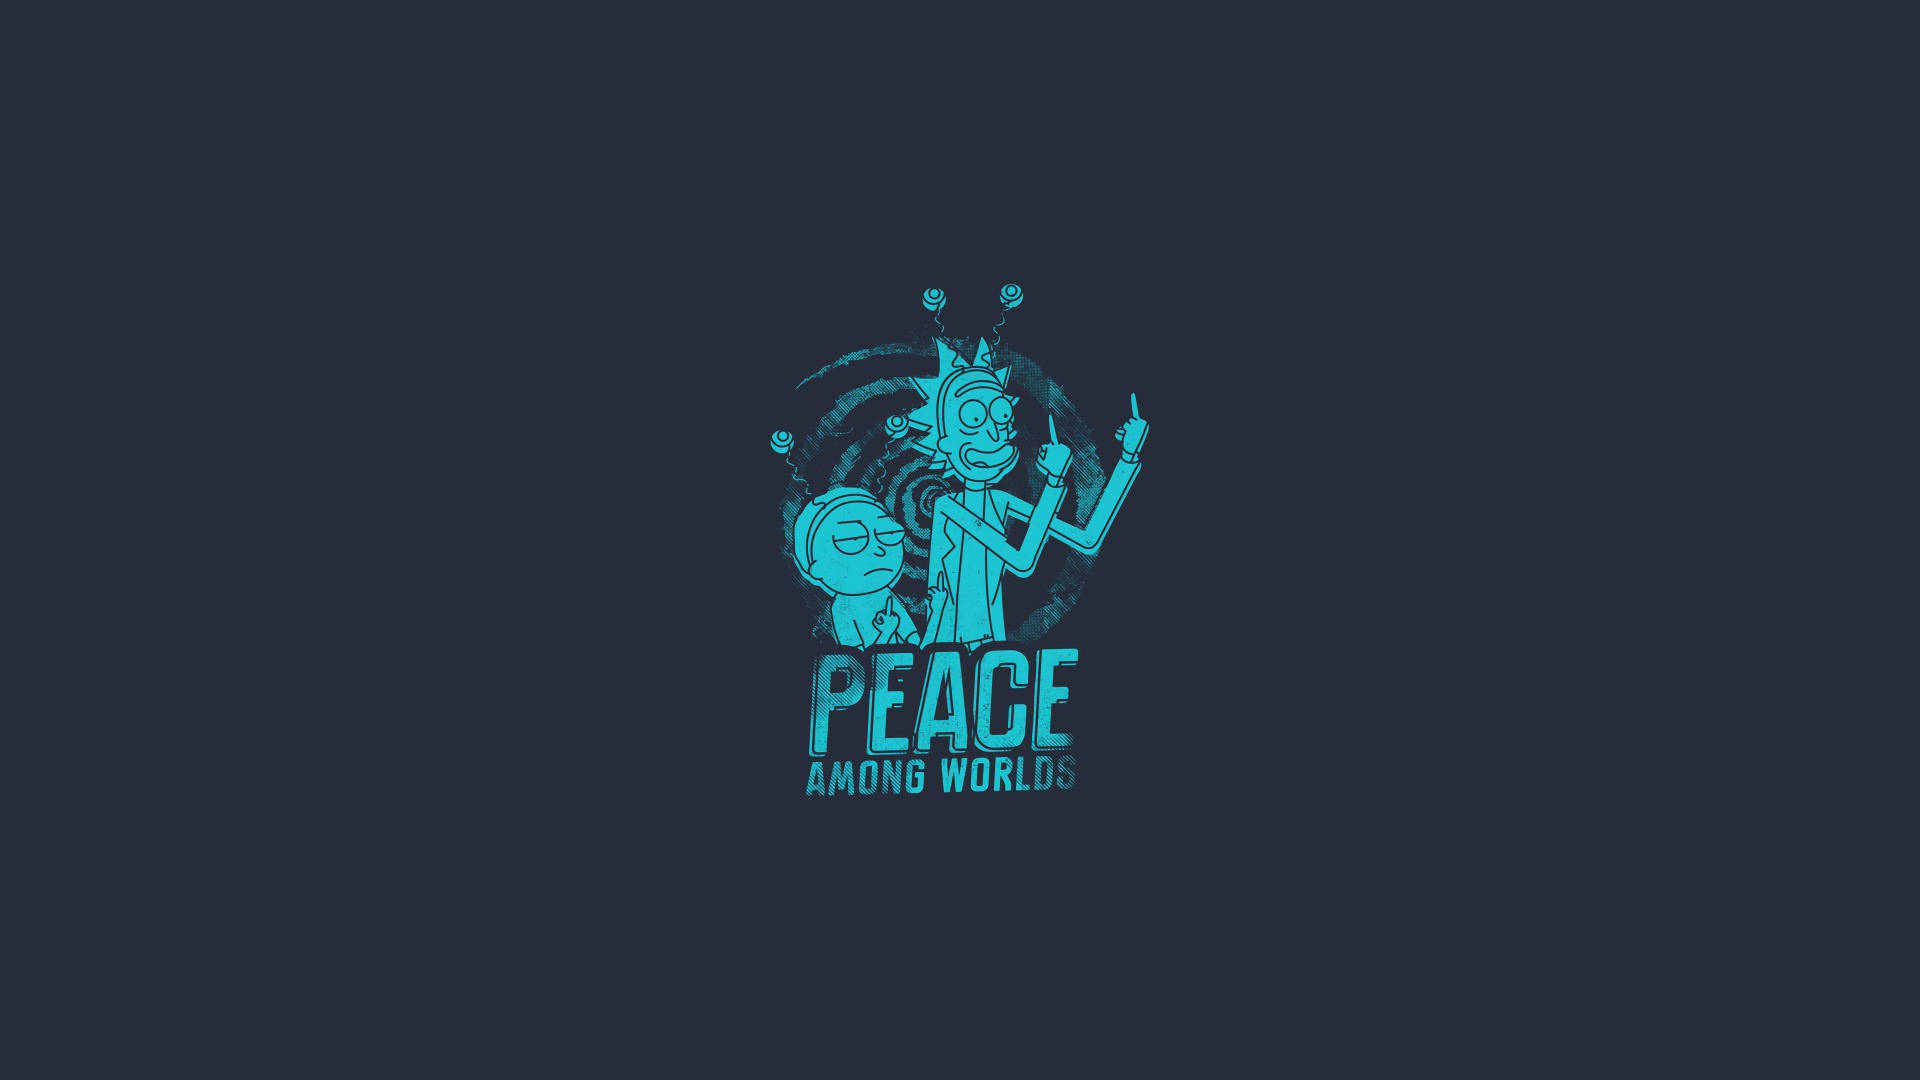 Download Minimalist Rick And Morty Peace Among Worlds Wallpaper | Wallpapers .com